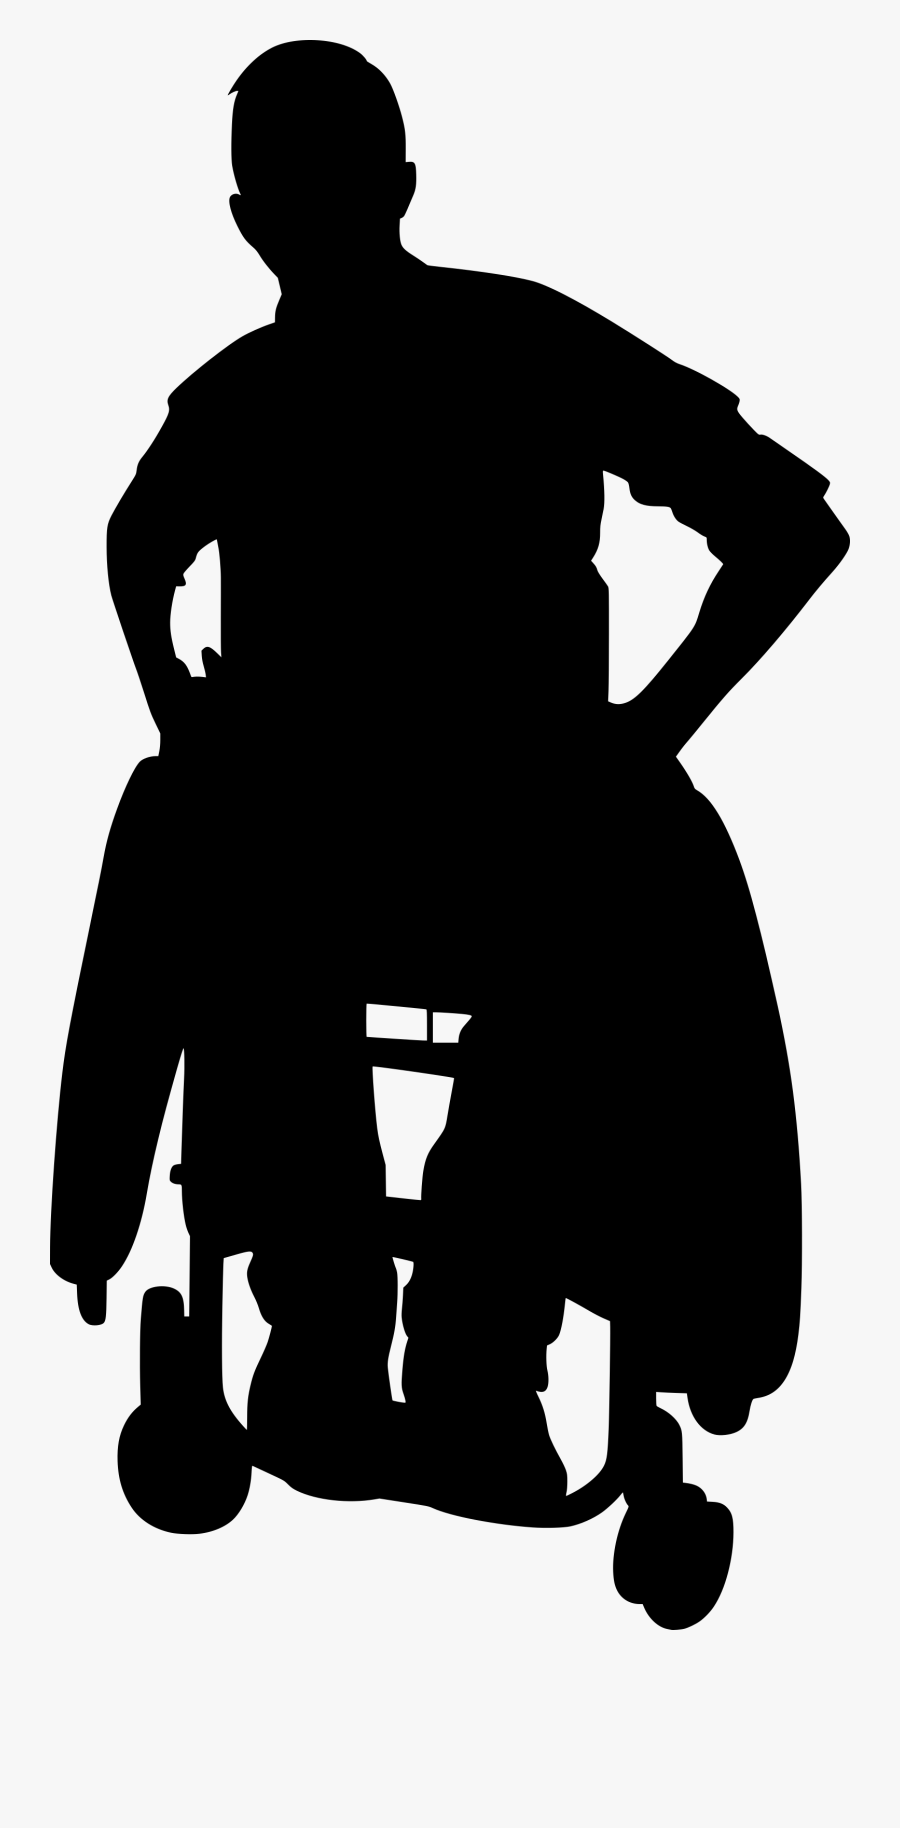 Free Download Silhouette- - Silhouette, Transparent Clipart